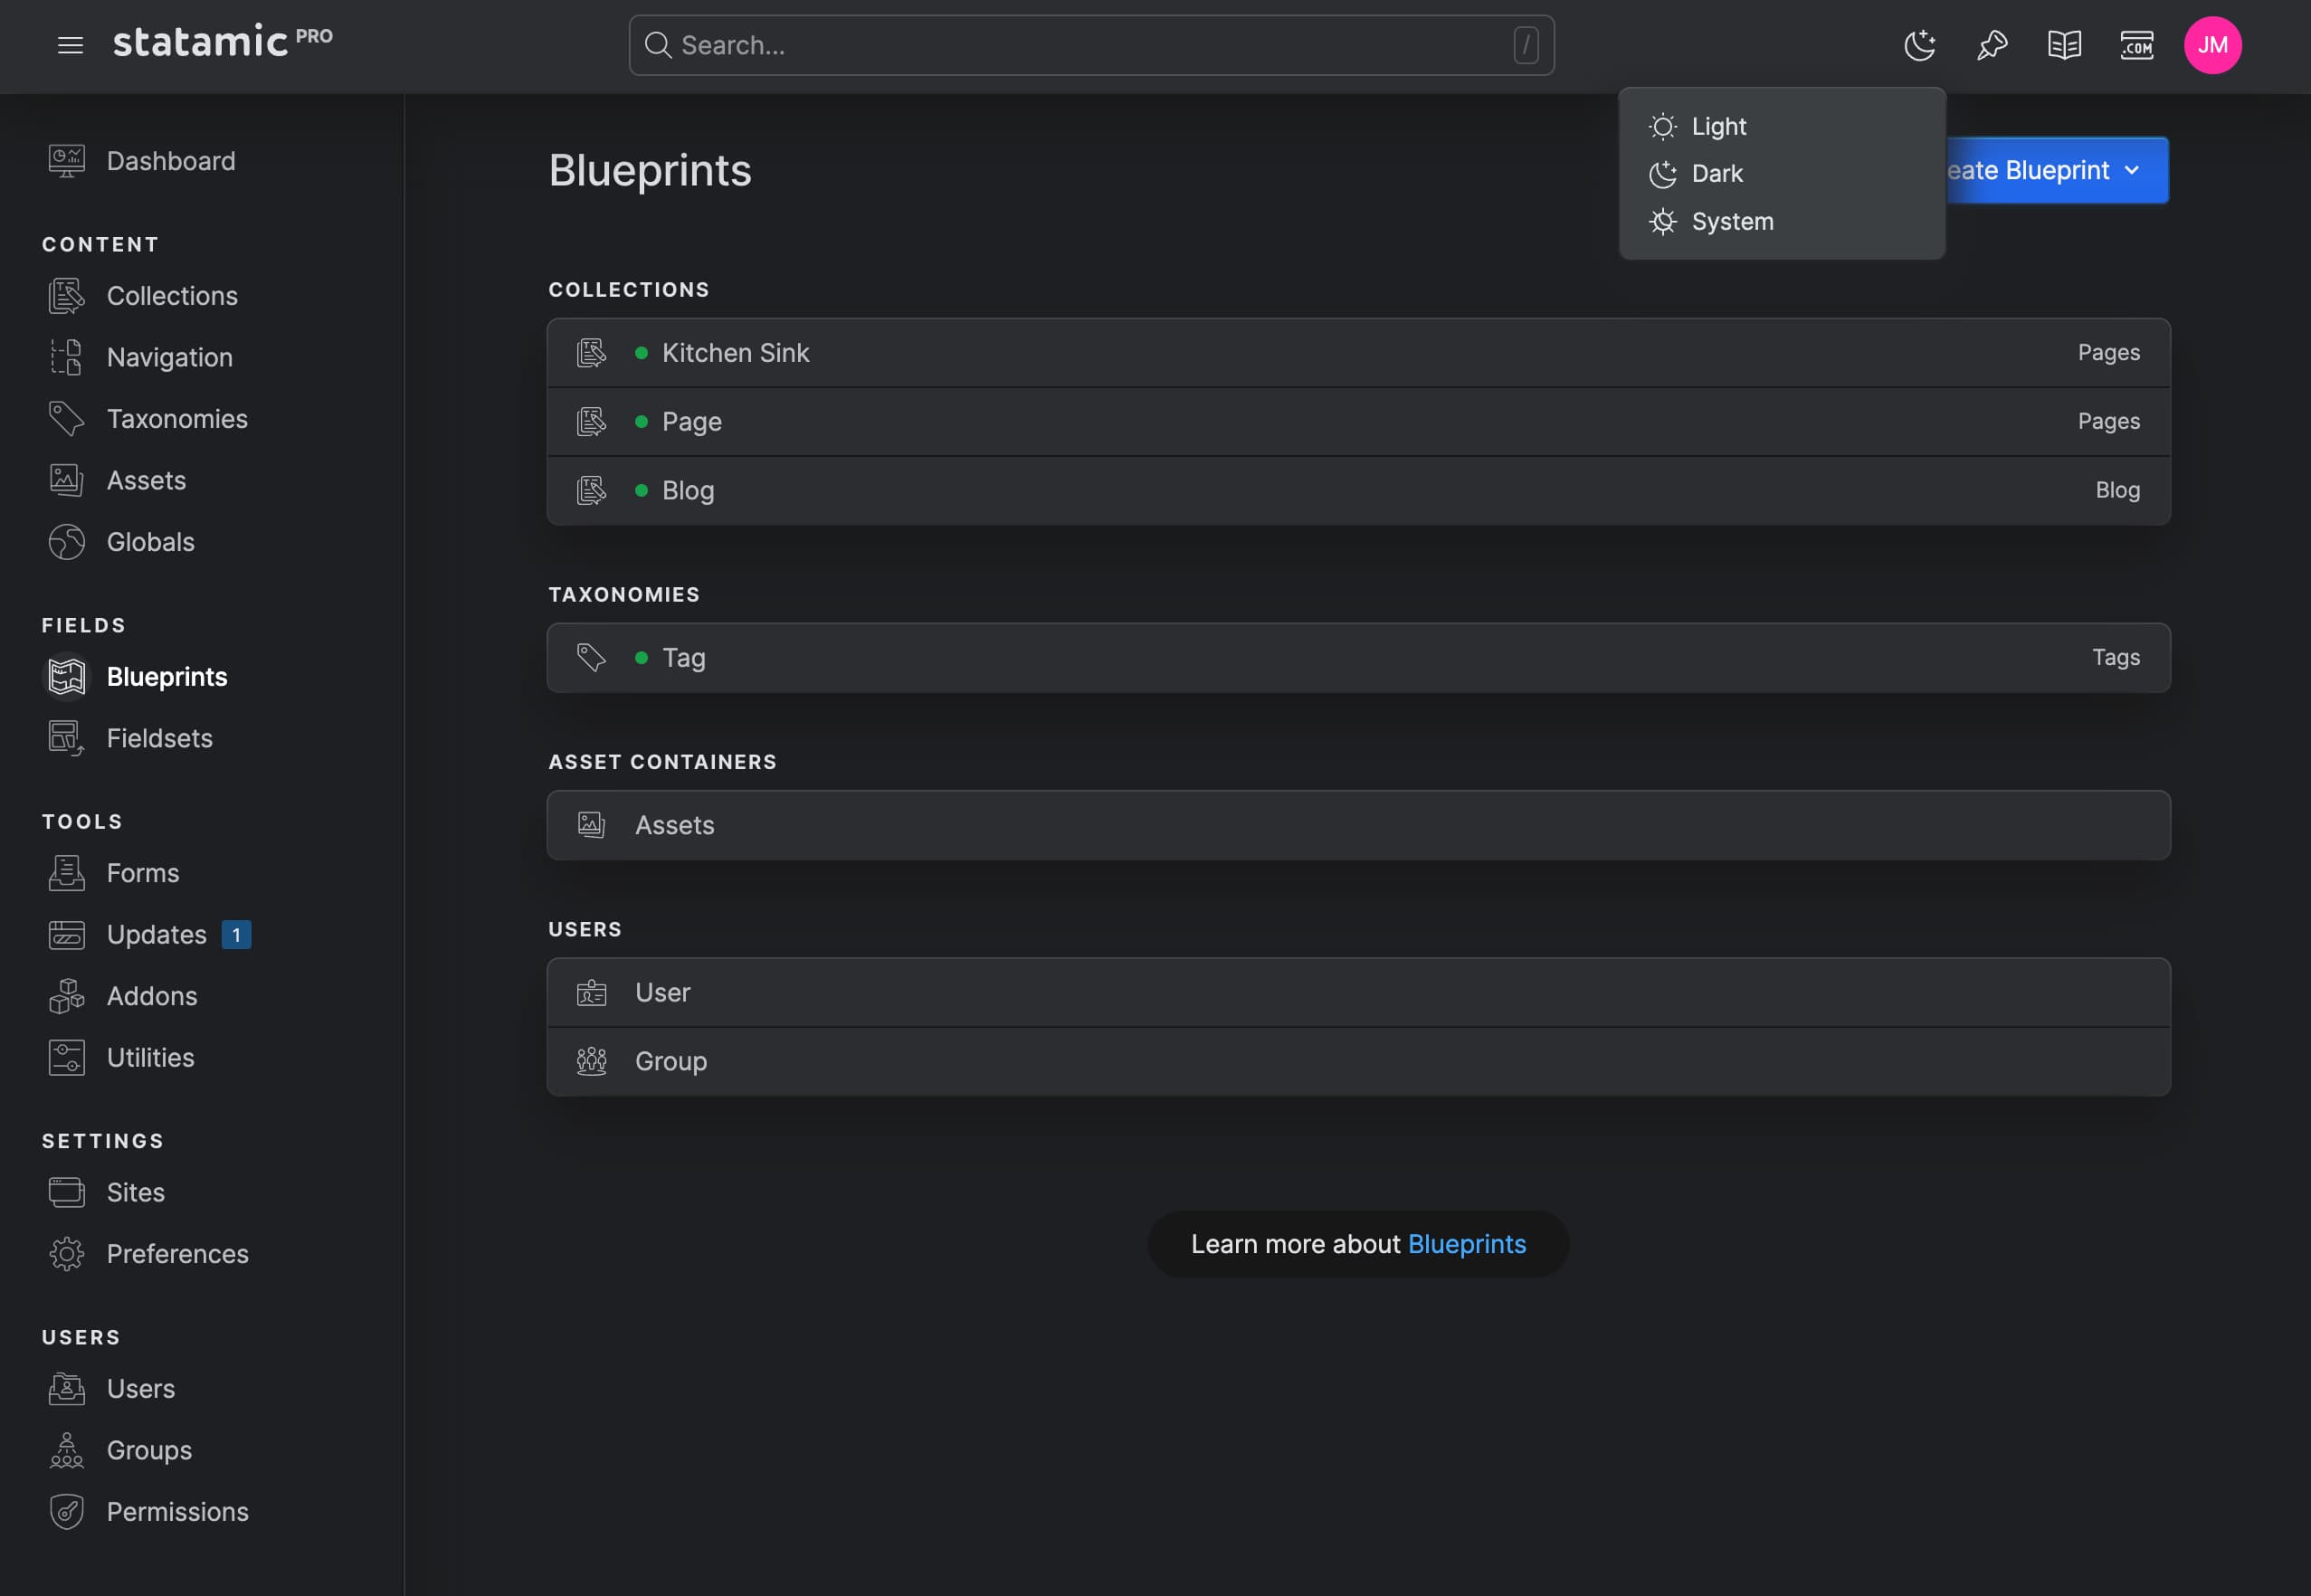 Statamic's Control Panel showing the Blueprints index while in dark mode.